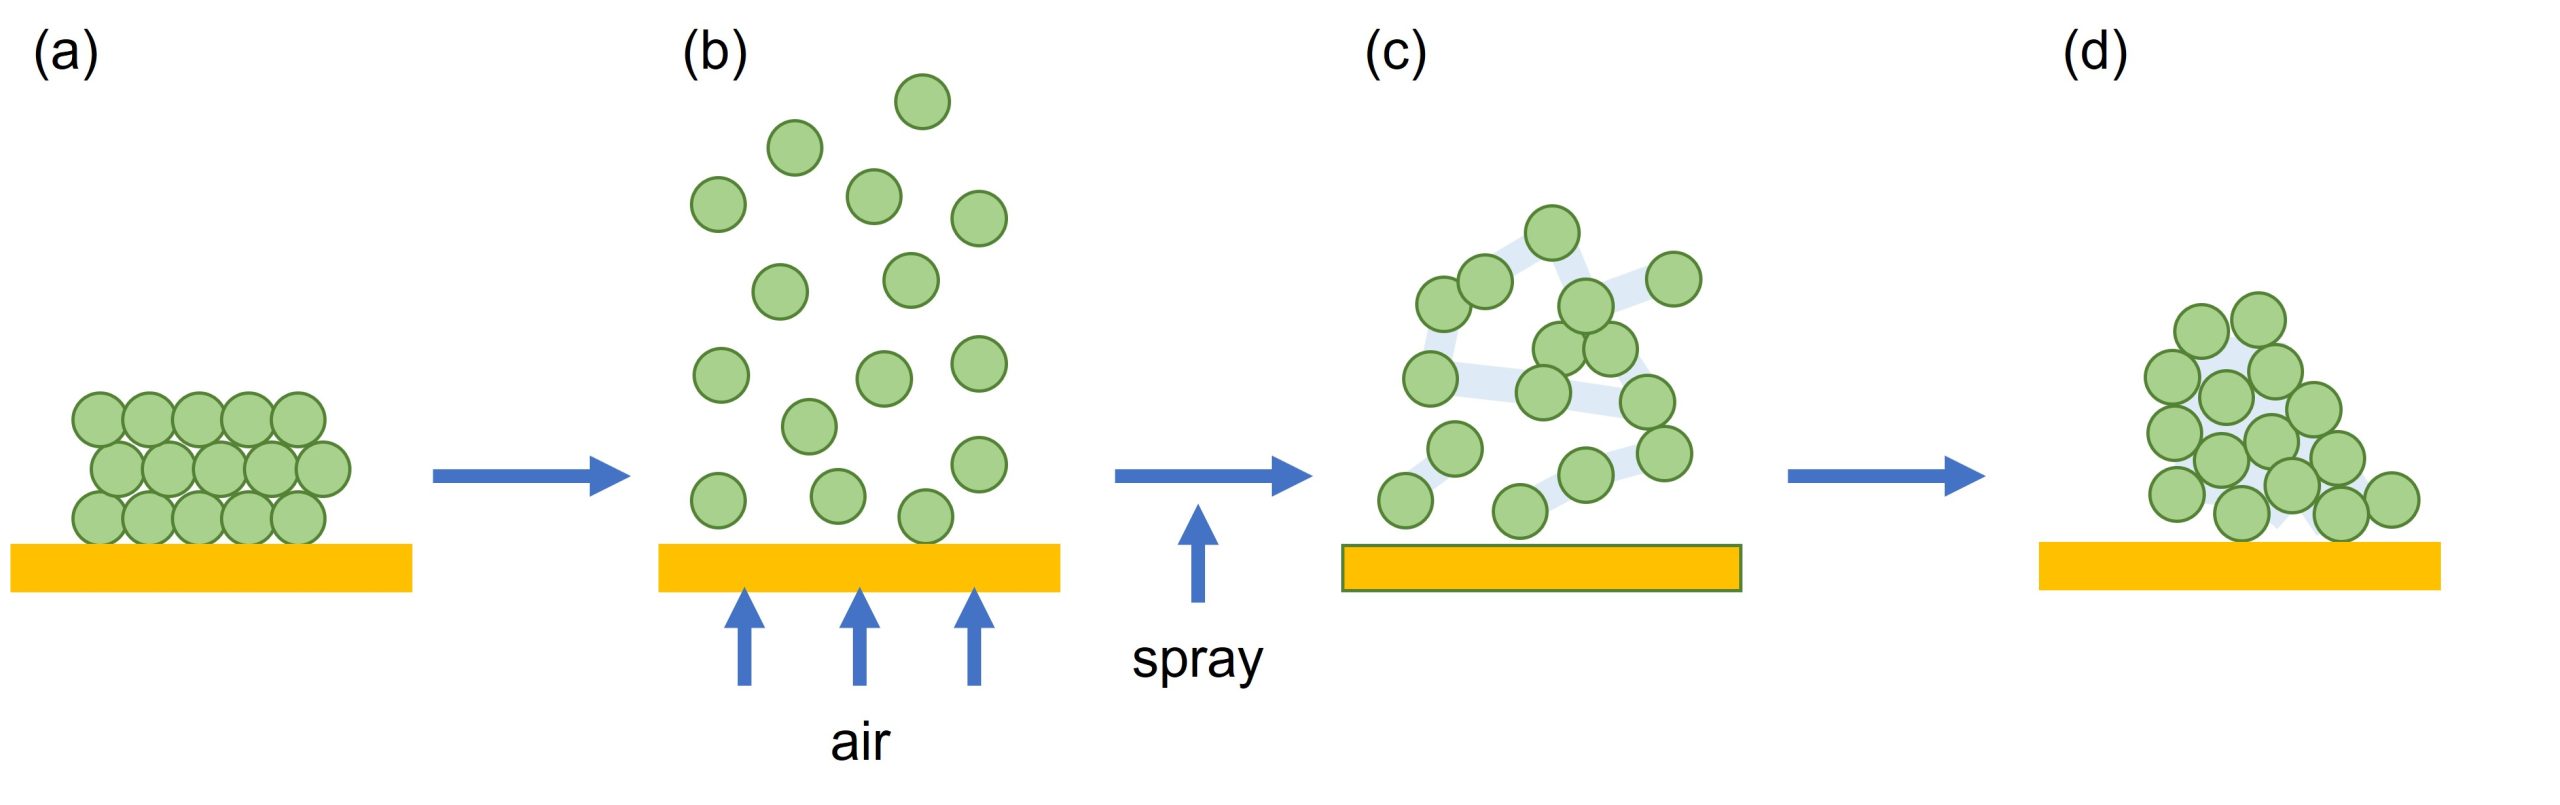 schematic to show key stages during fluid-bed mediated wet granulation